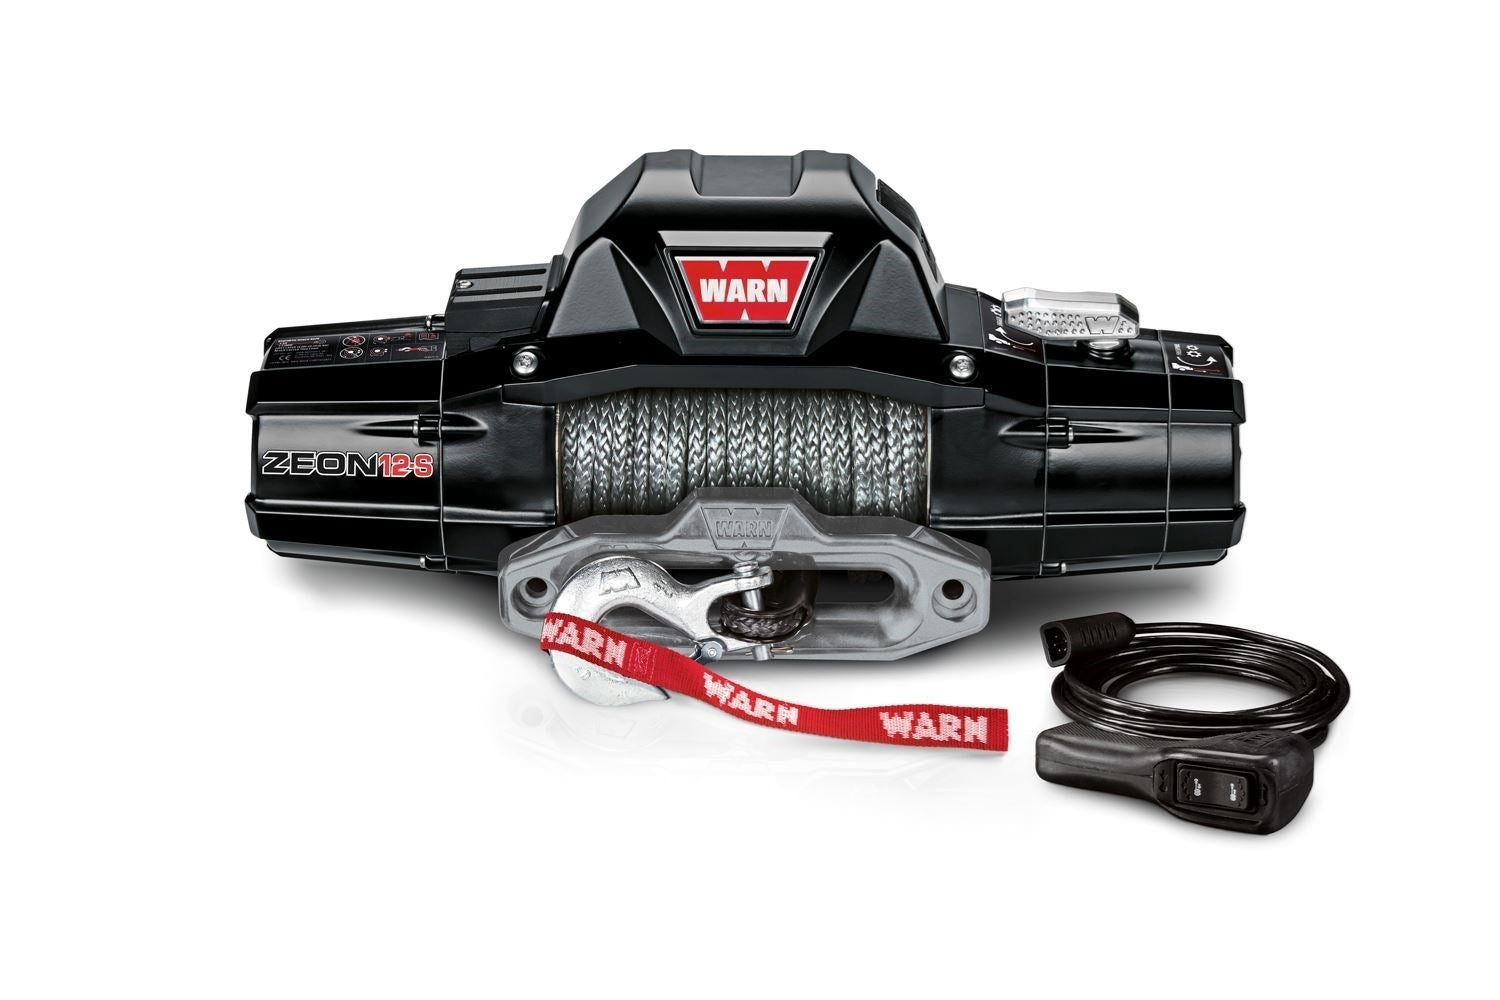 Warn Zeon 12 12v Electric Winch with Steel Rope close up